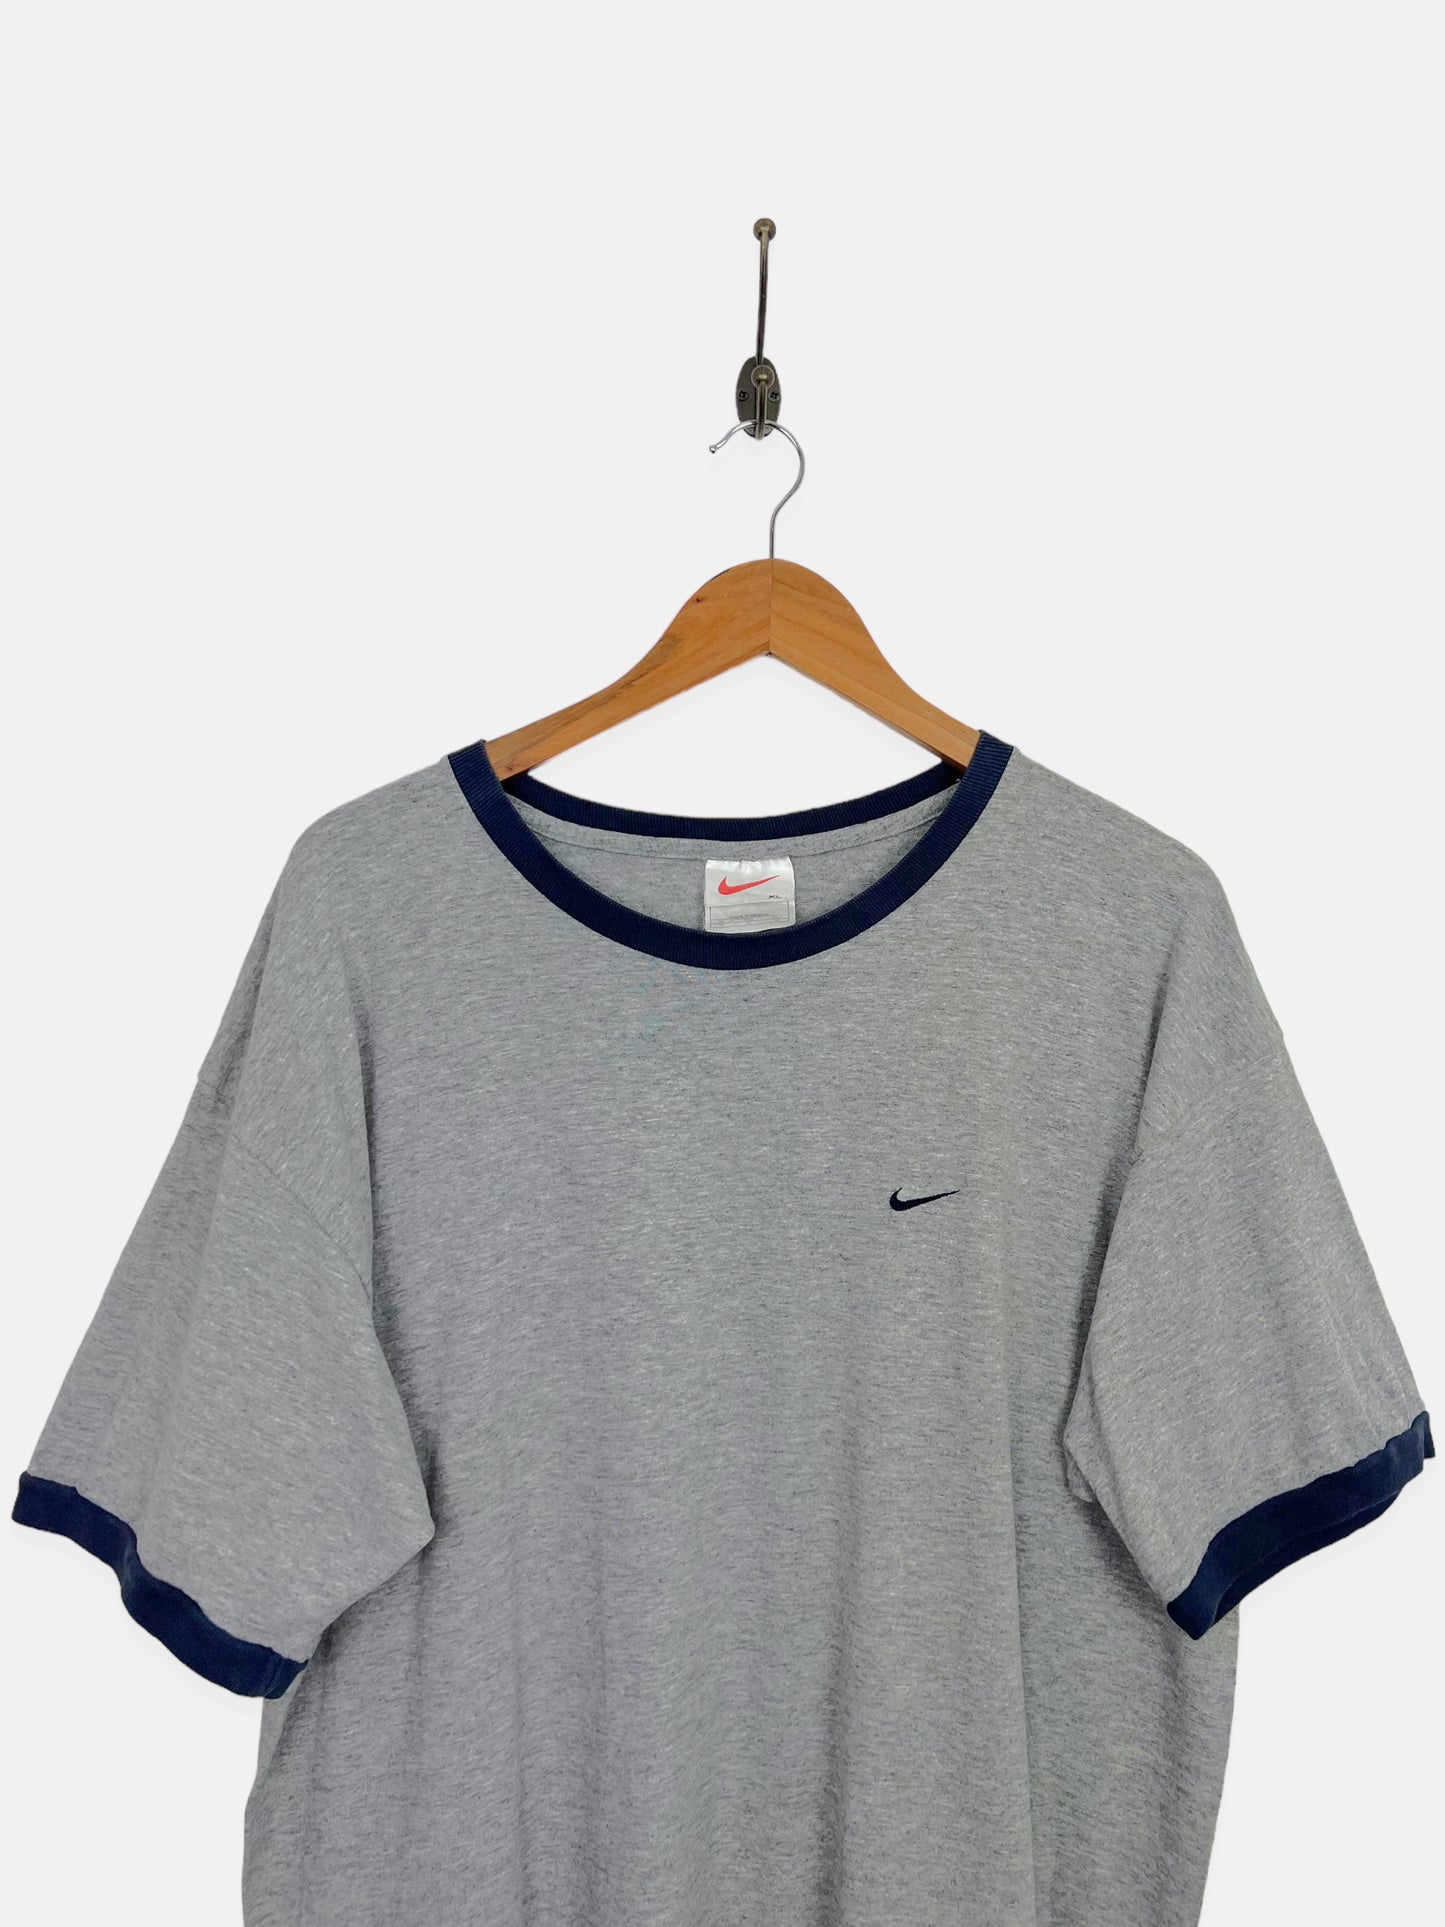 90's Nike Embroidered Vintage T-Shirt Size L-XL